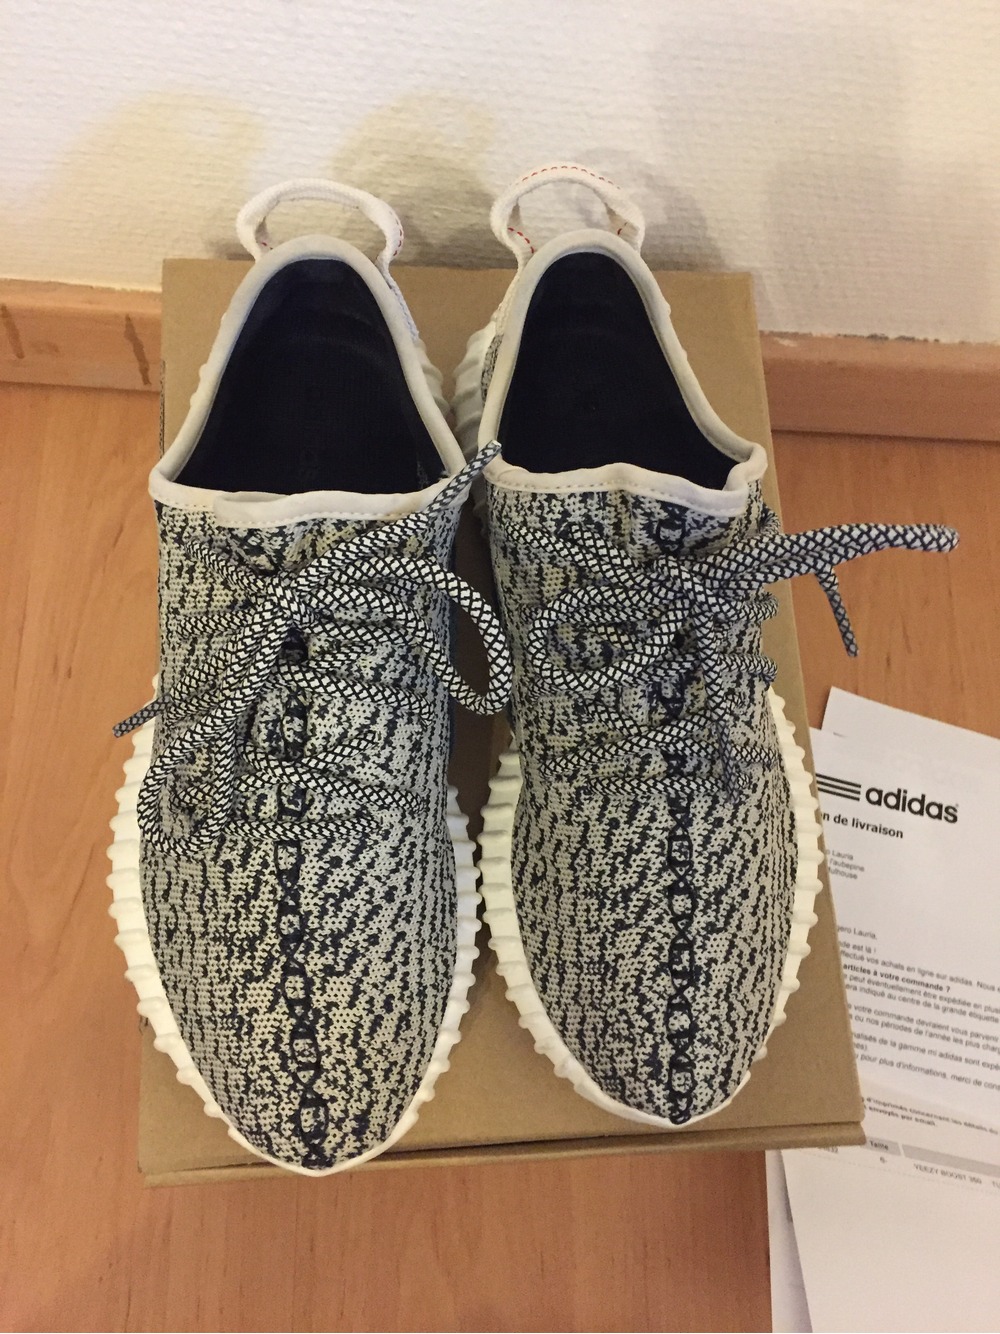 Adidas Yeezy Boost 350 Turtle Dove Cheapyeezy Dhgate Review